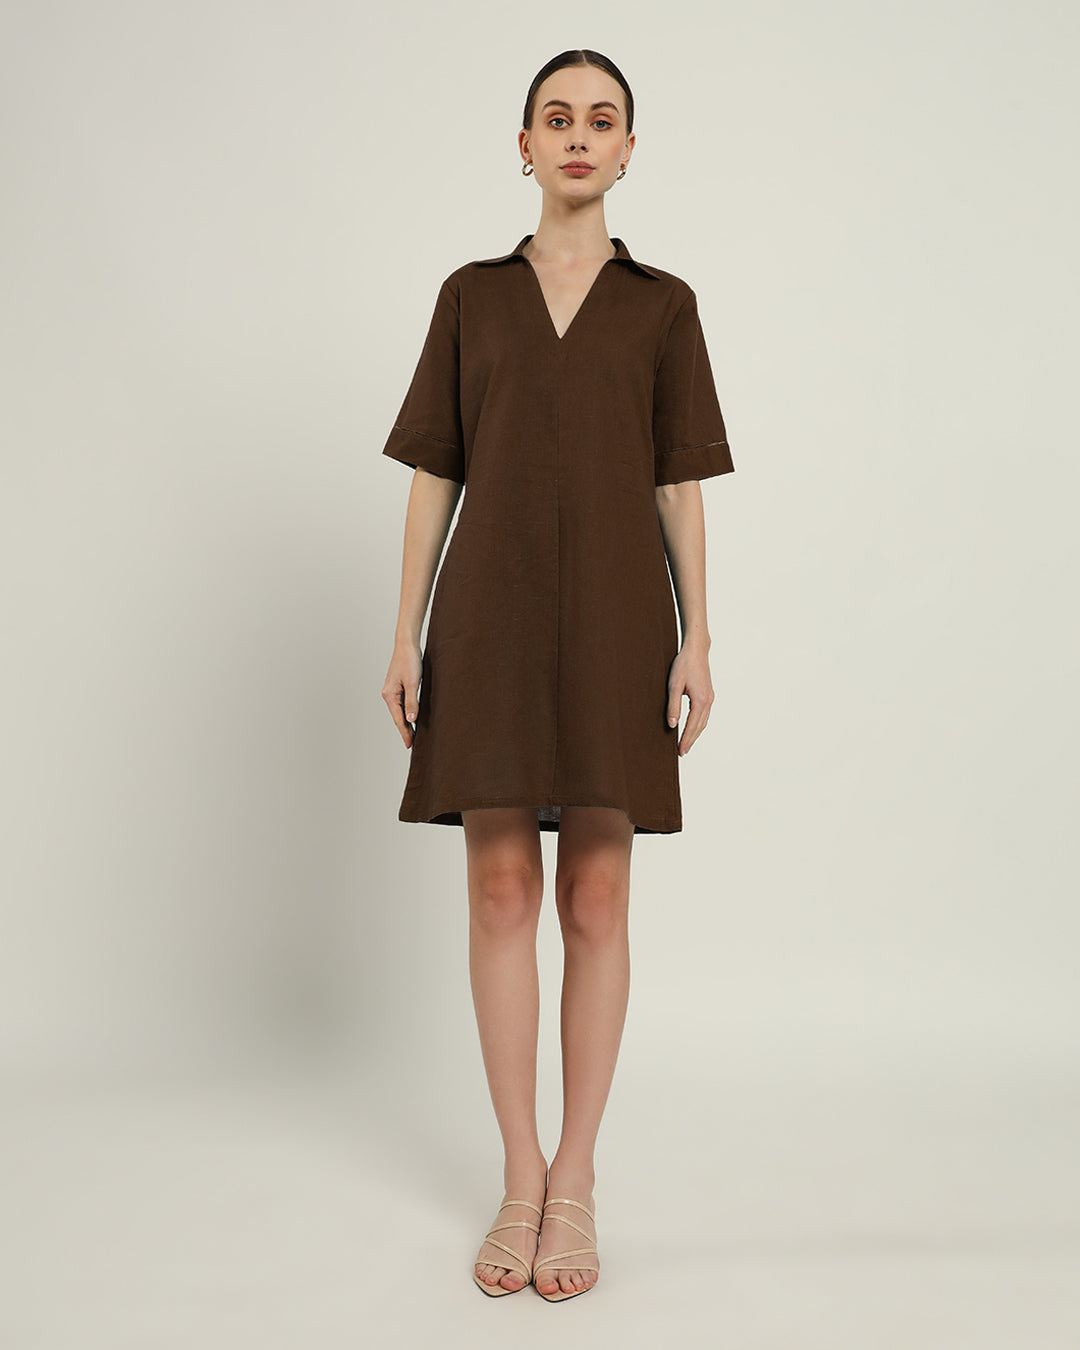 The Ermont Nutshell Cotton Dress